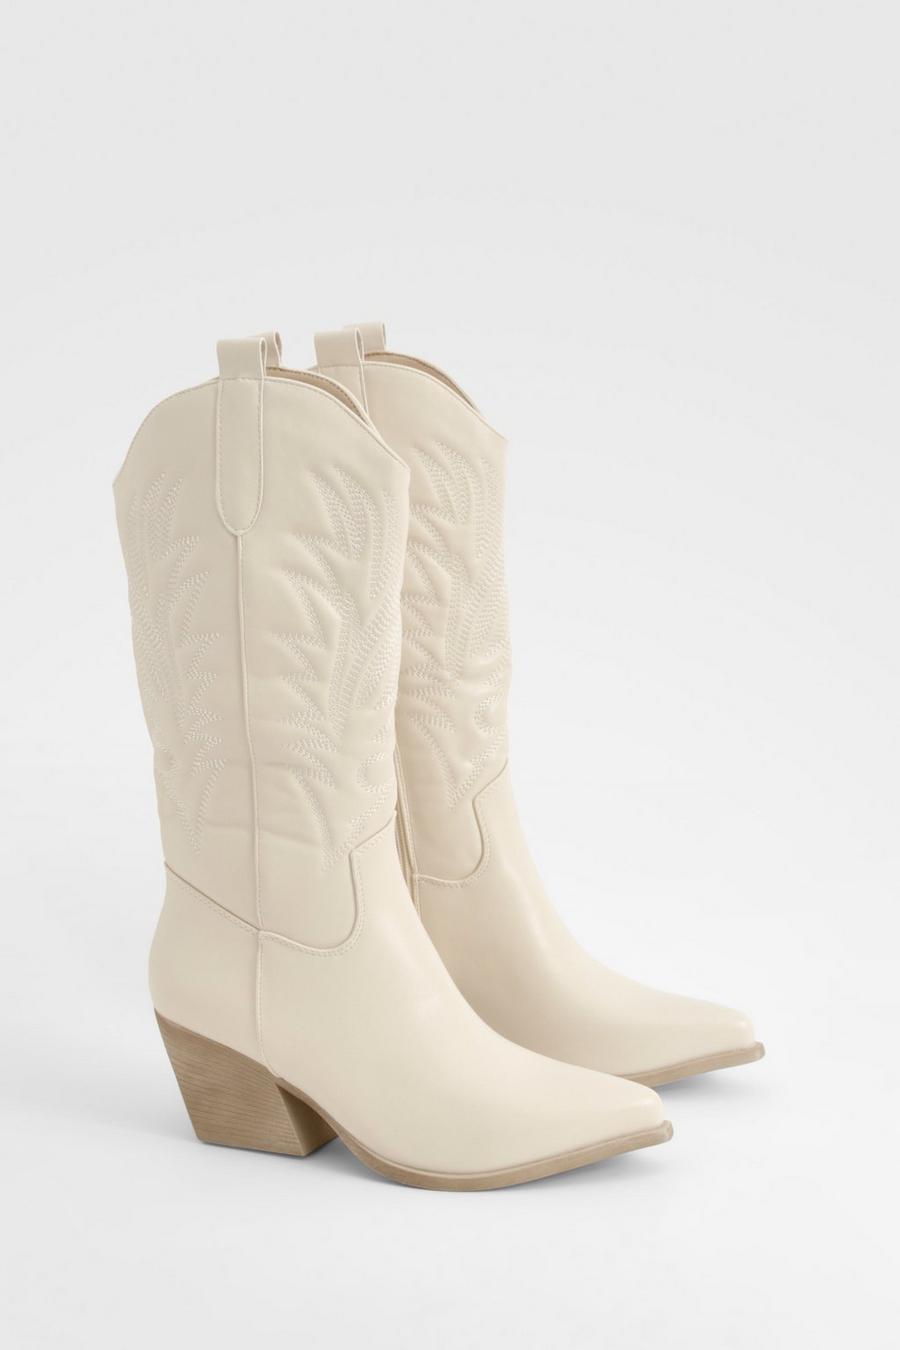 Beige Embroidered Knee High Western Boots